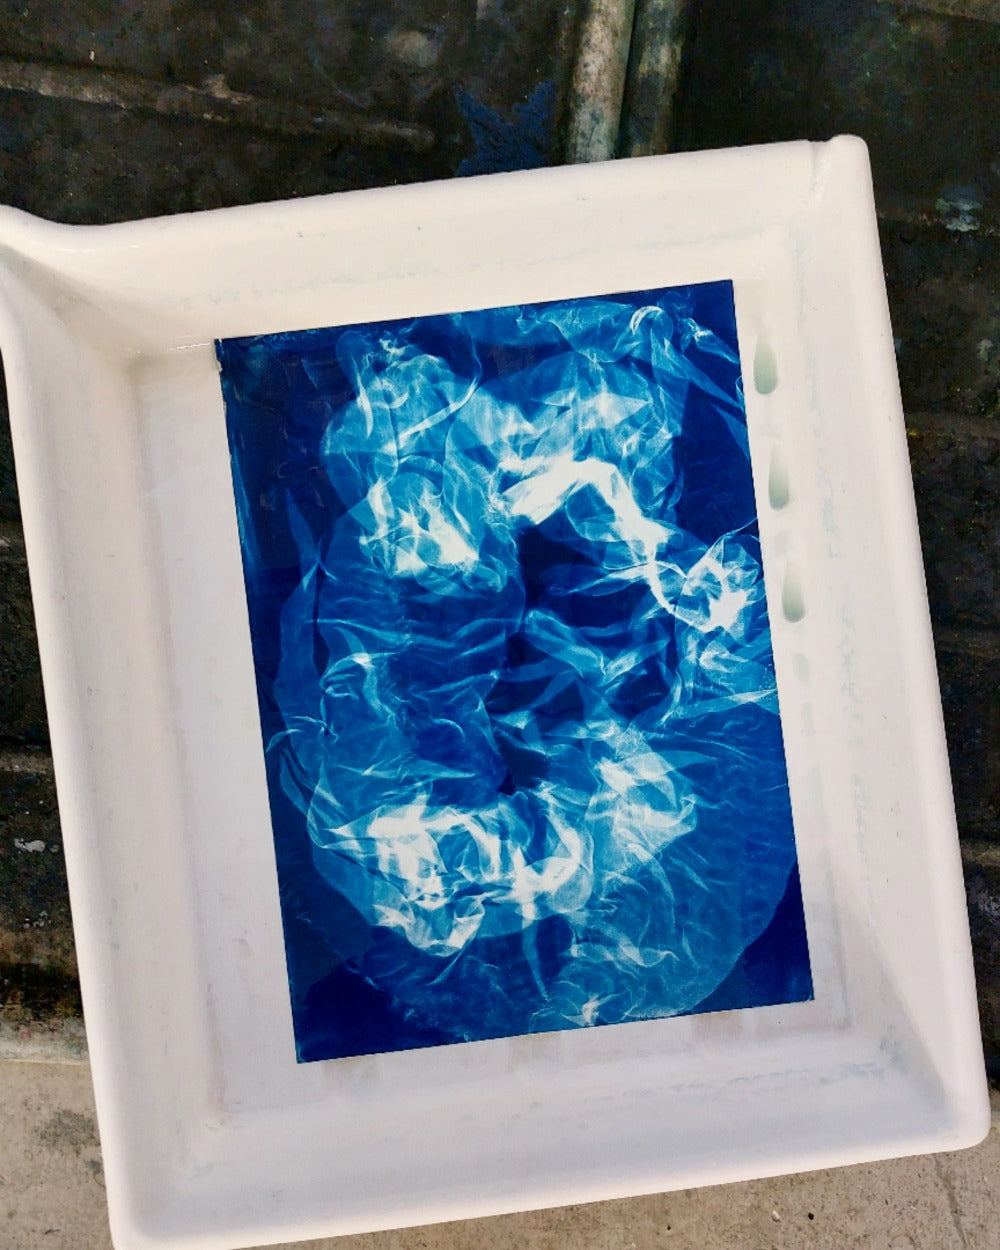 Cyanotype After Work - inspiration, ideas and relaxation at the end of the day